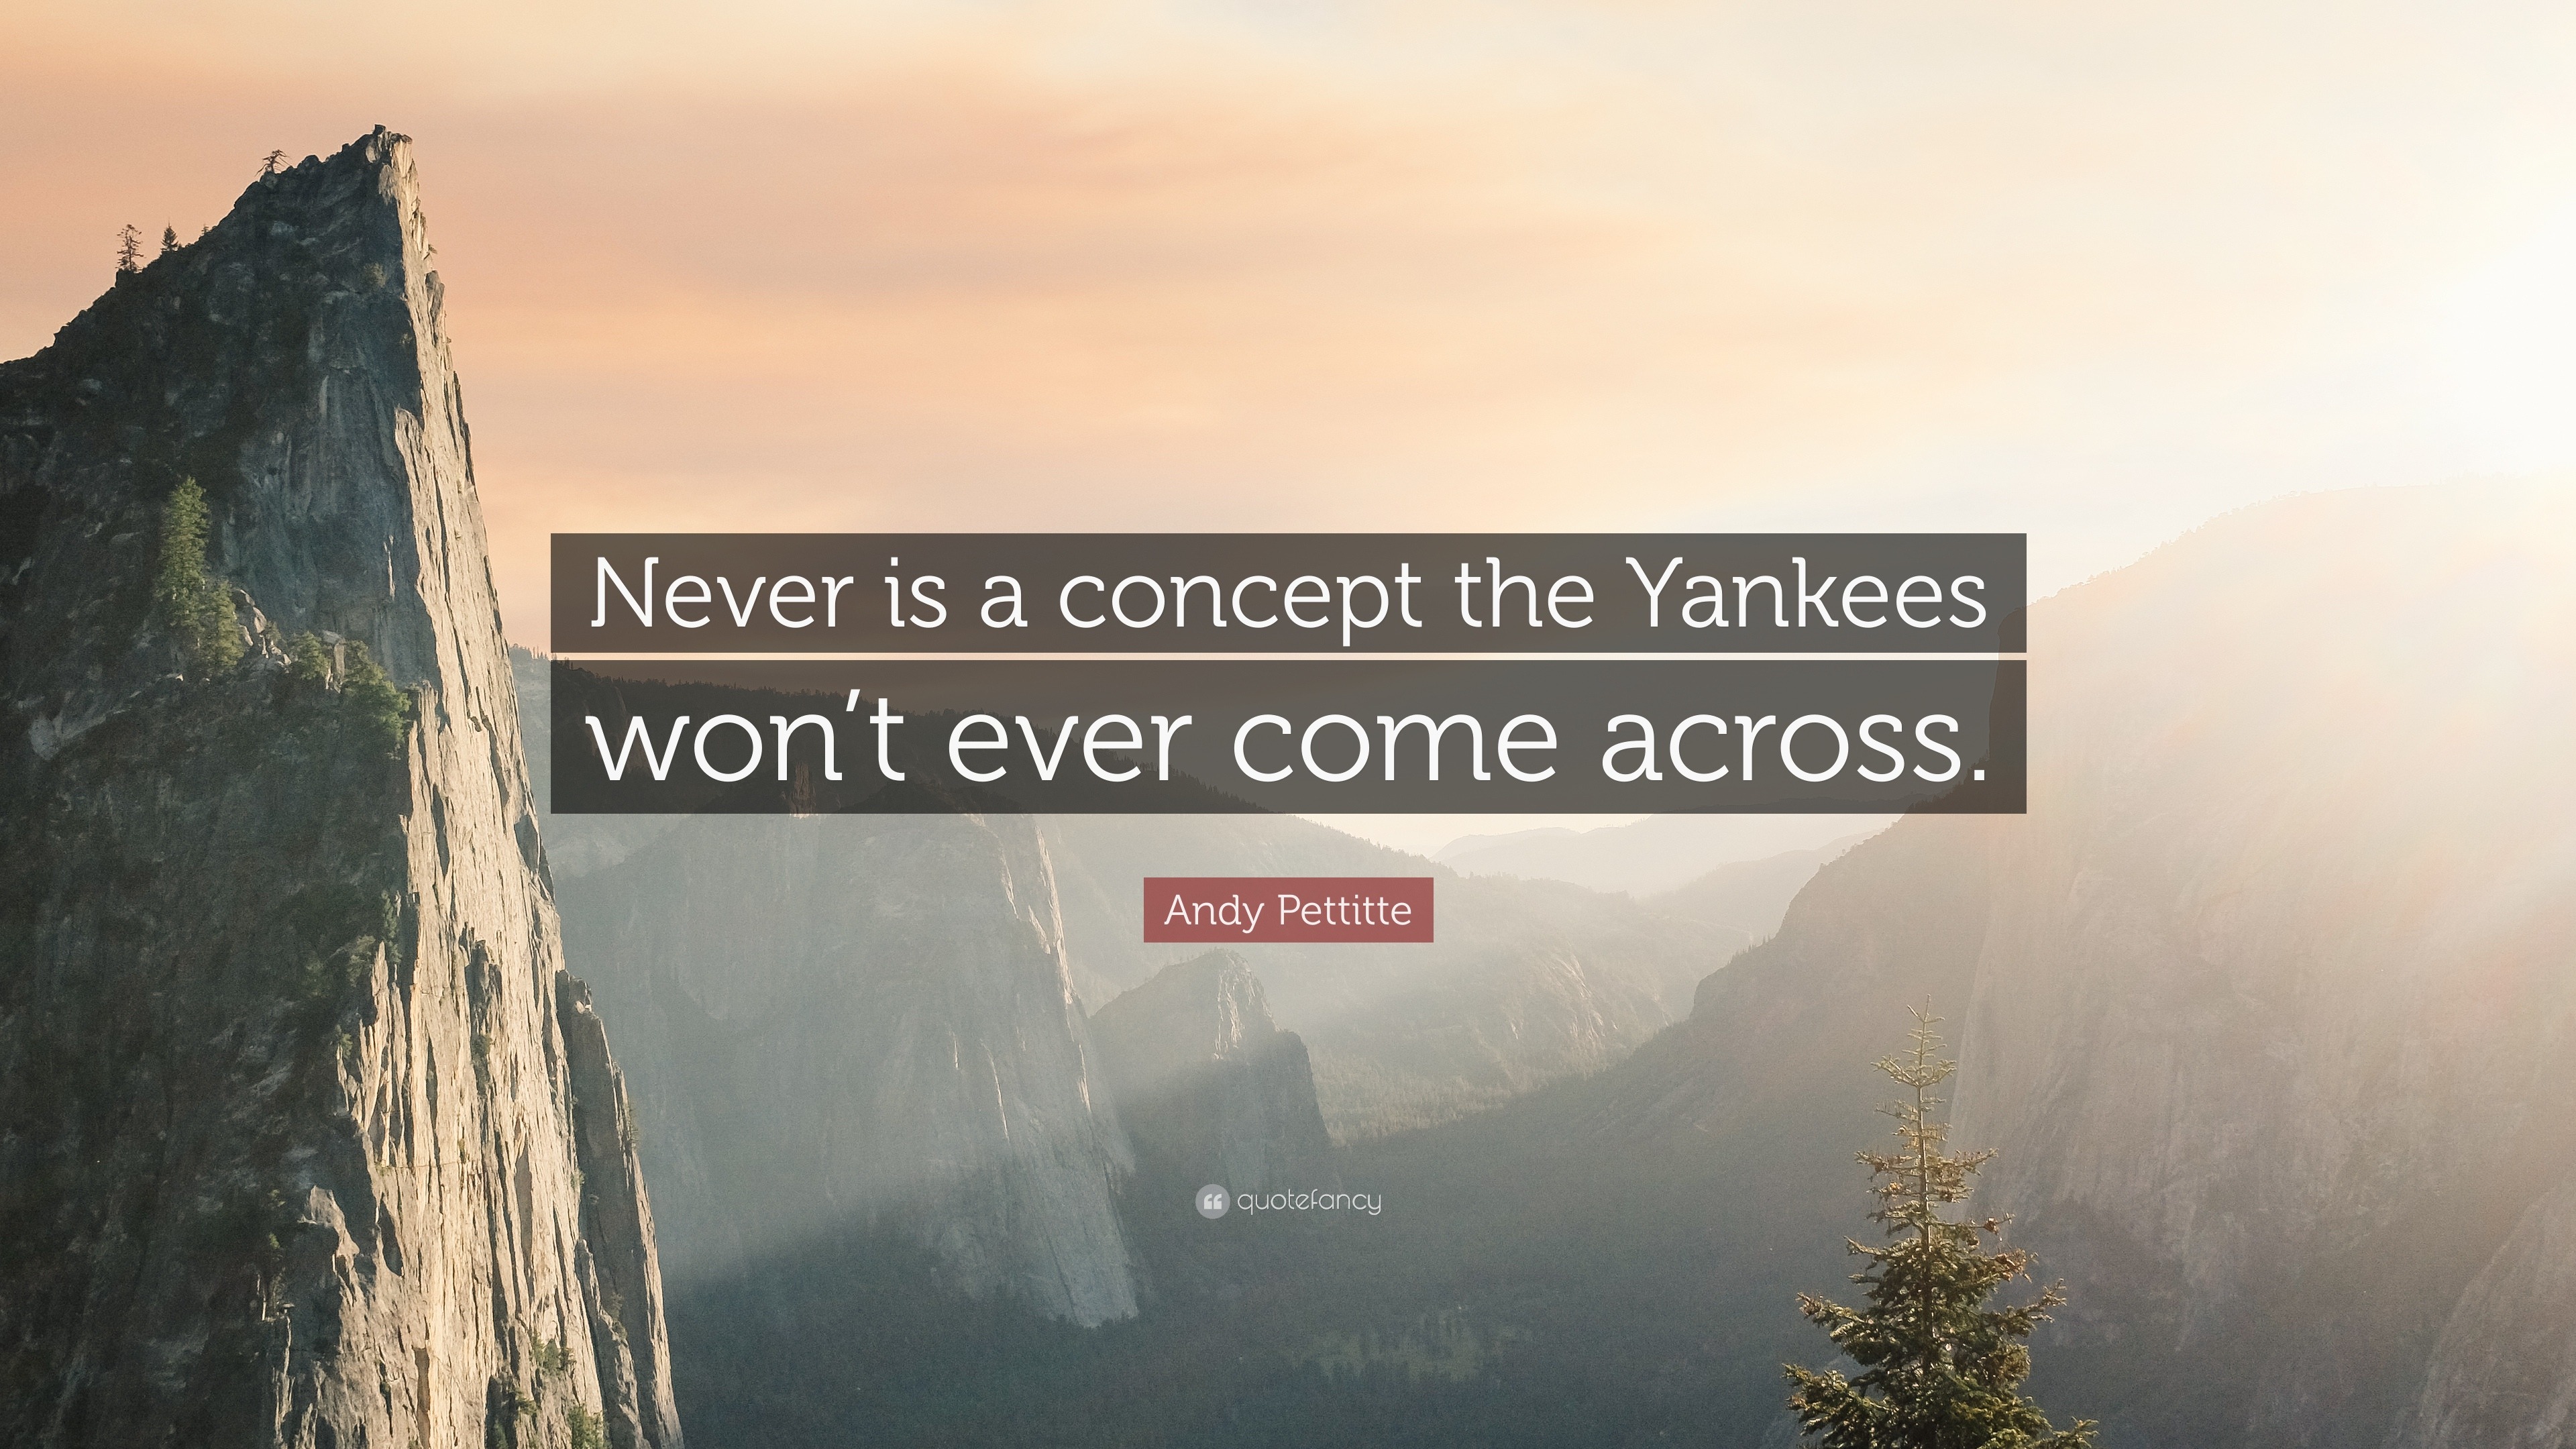 Top 15 Andy Pettitte Quotes (2023 Update) - Quotefancy